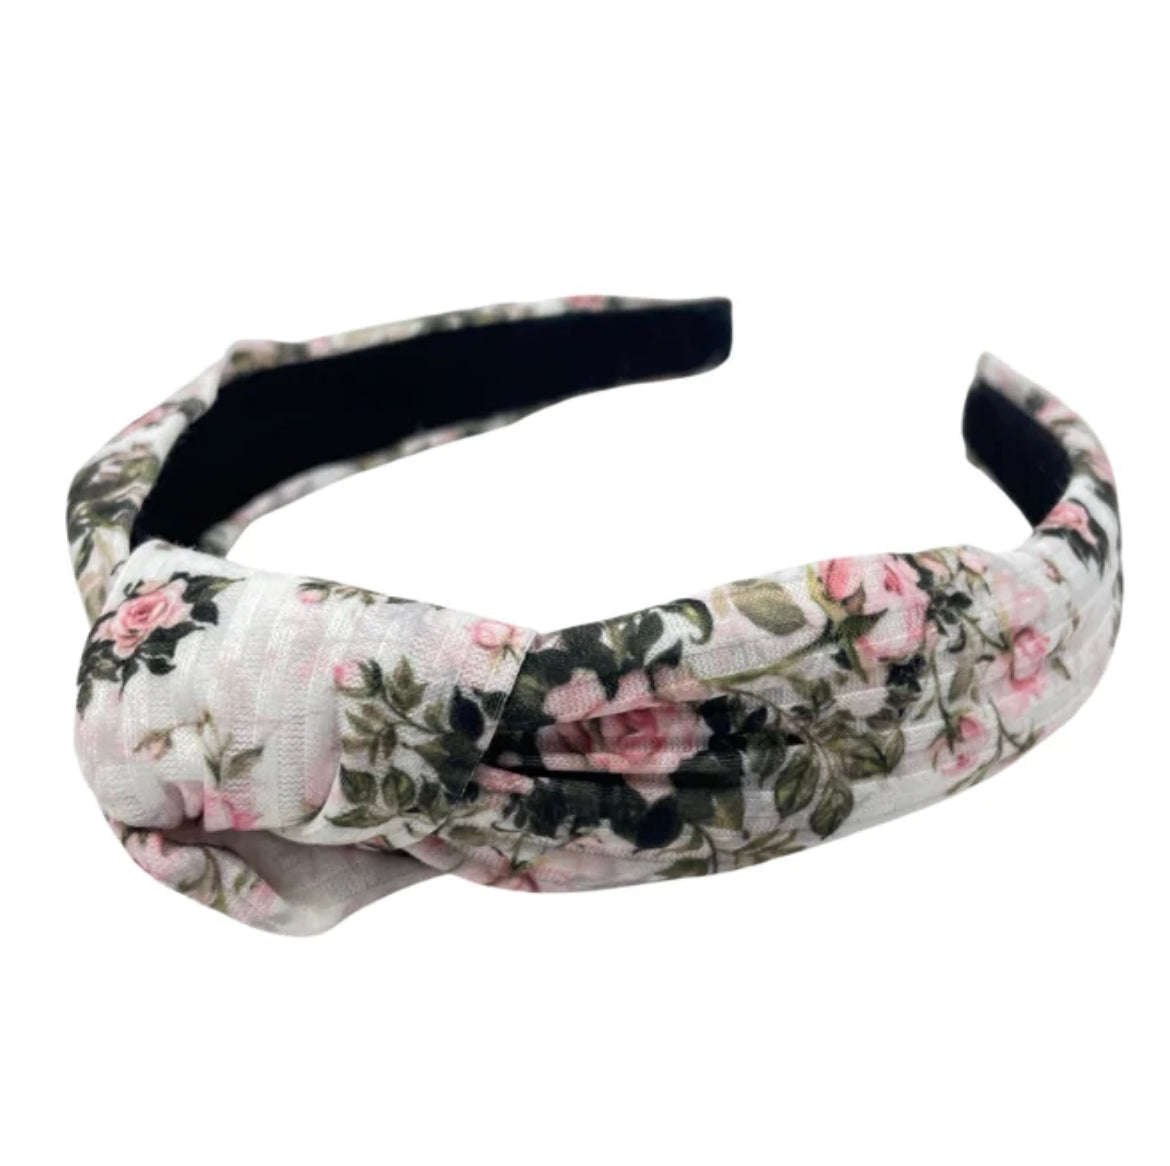 White Floral Knotted Hard Headband!